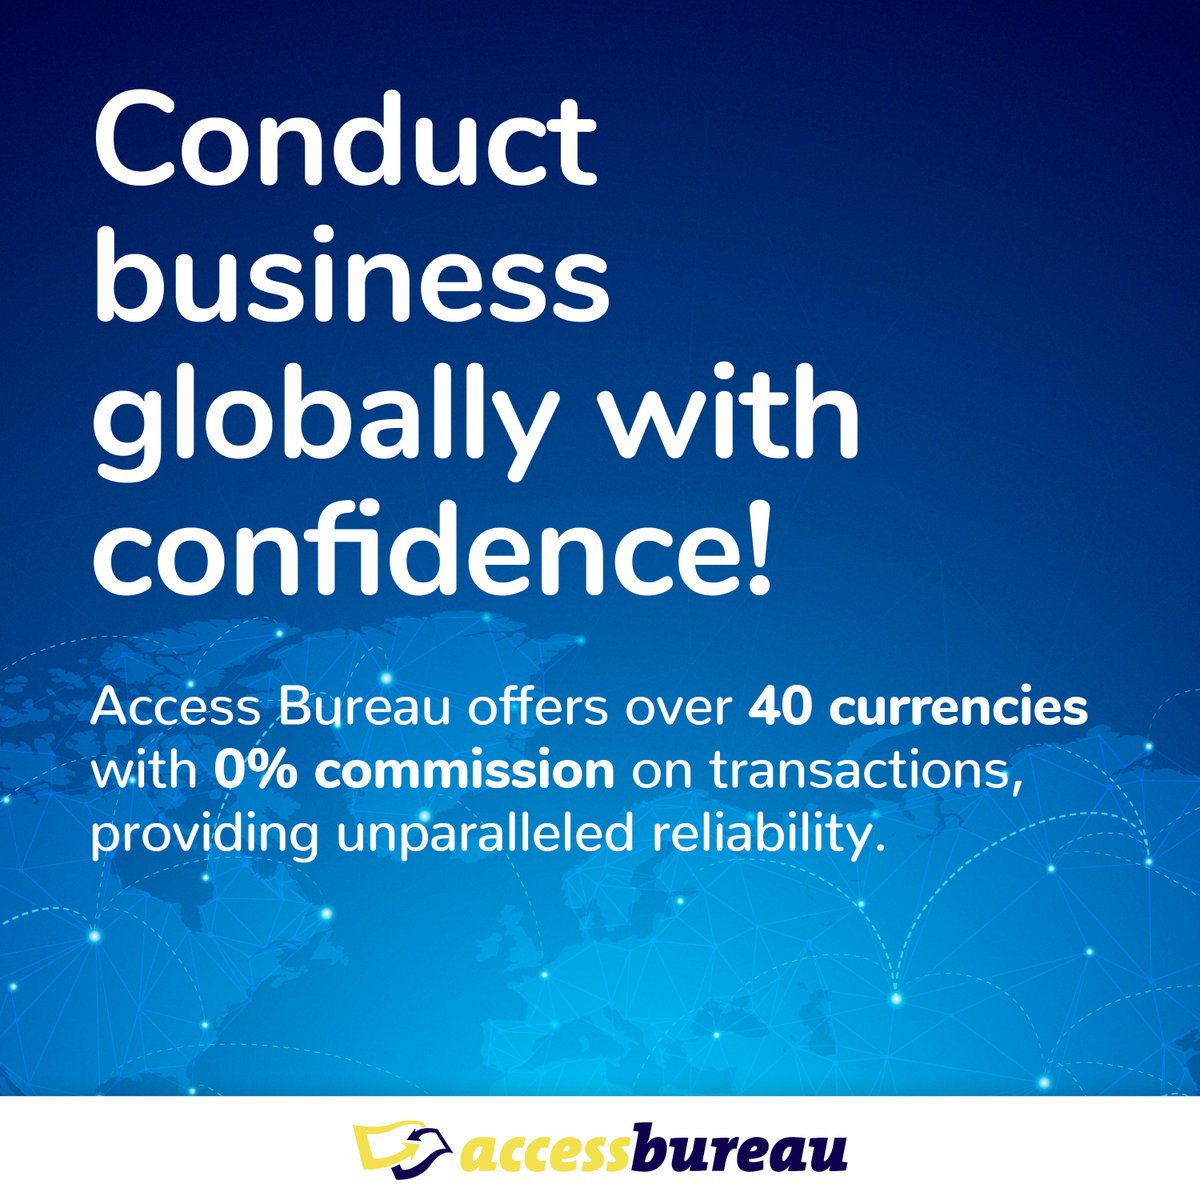 💼 Conduct business globally with confidence! Access Bureau offers over 40 currencies with 0% commission on transactions, providing unparalleled reliability. 

#AccessBureau #FinancialTips #Finance #Money #CurrencyExchange #ExchangeRates #TravelSafe #Travel